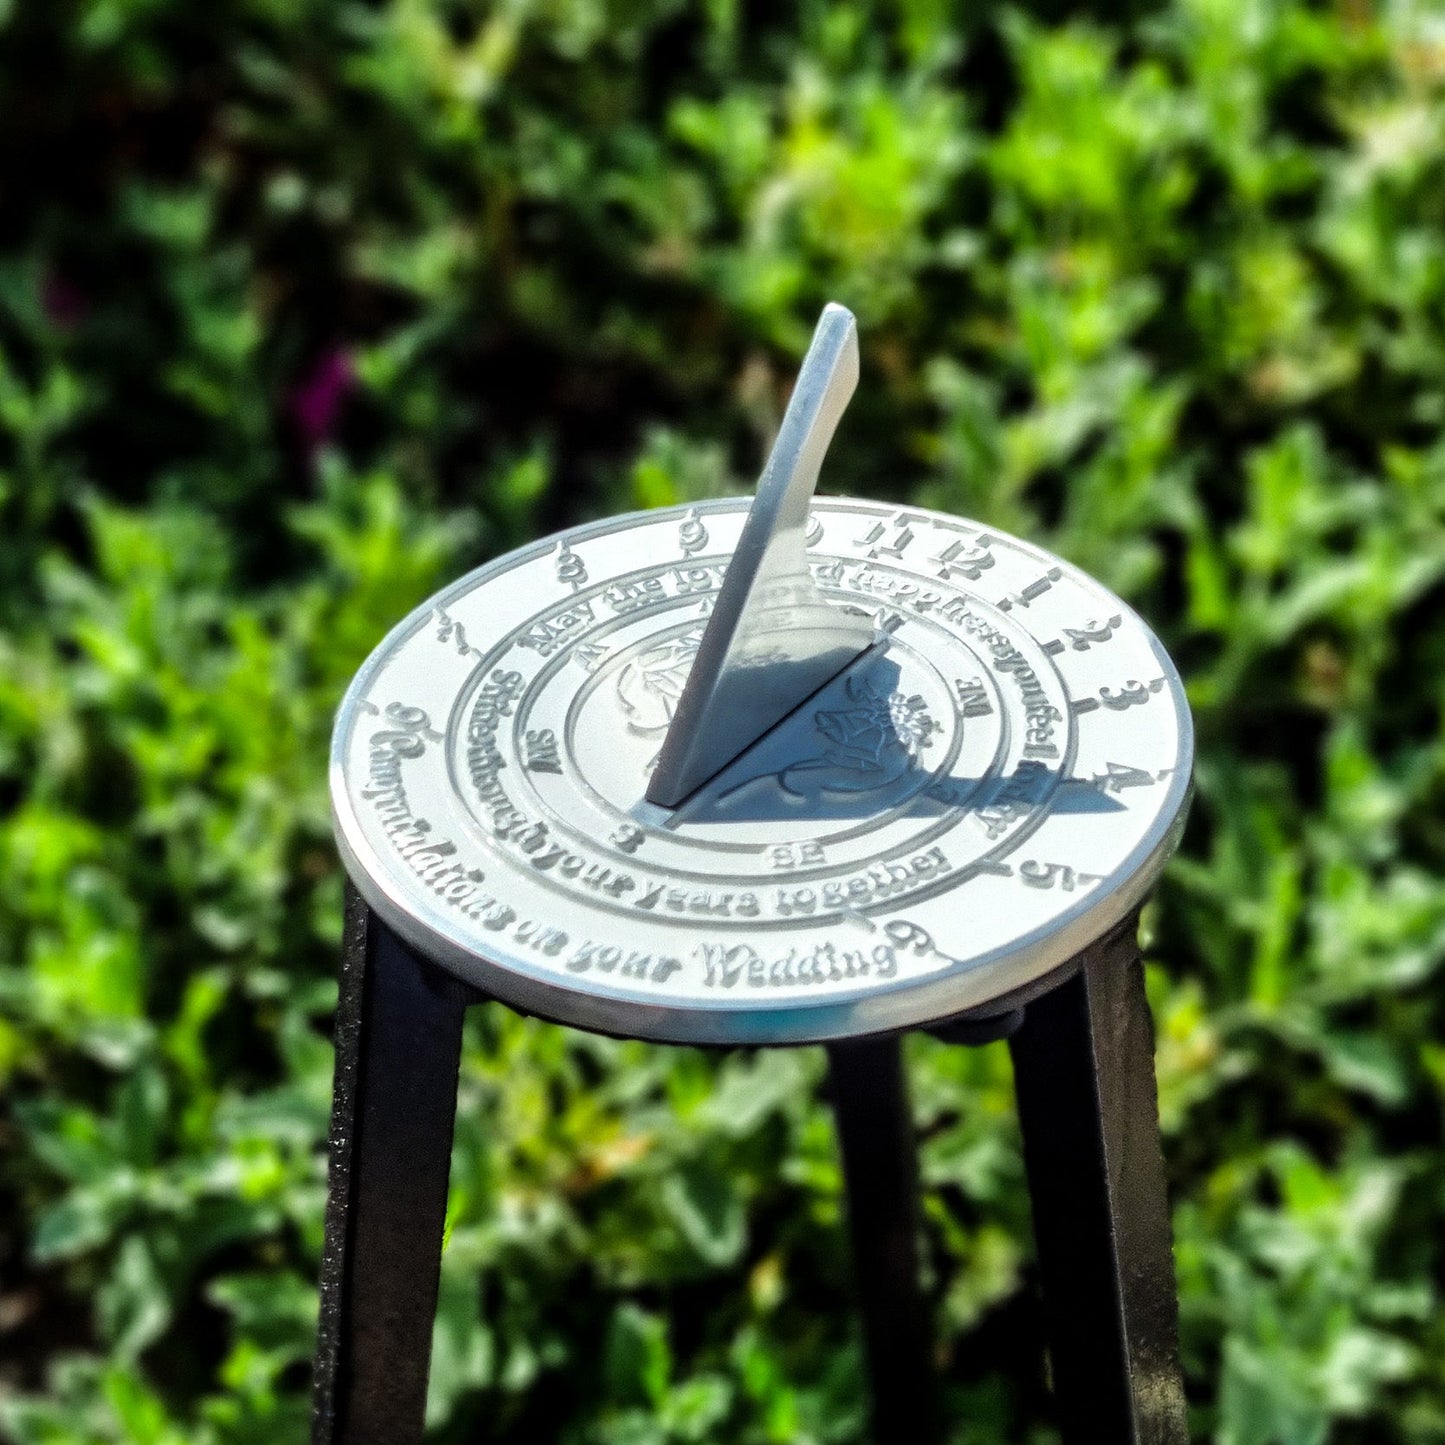 Wedding Sundial Gift ‘Your Years Together' - The Metal Foundry